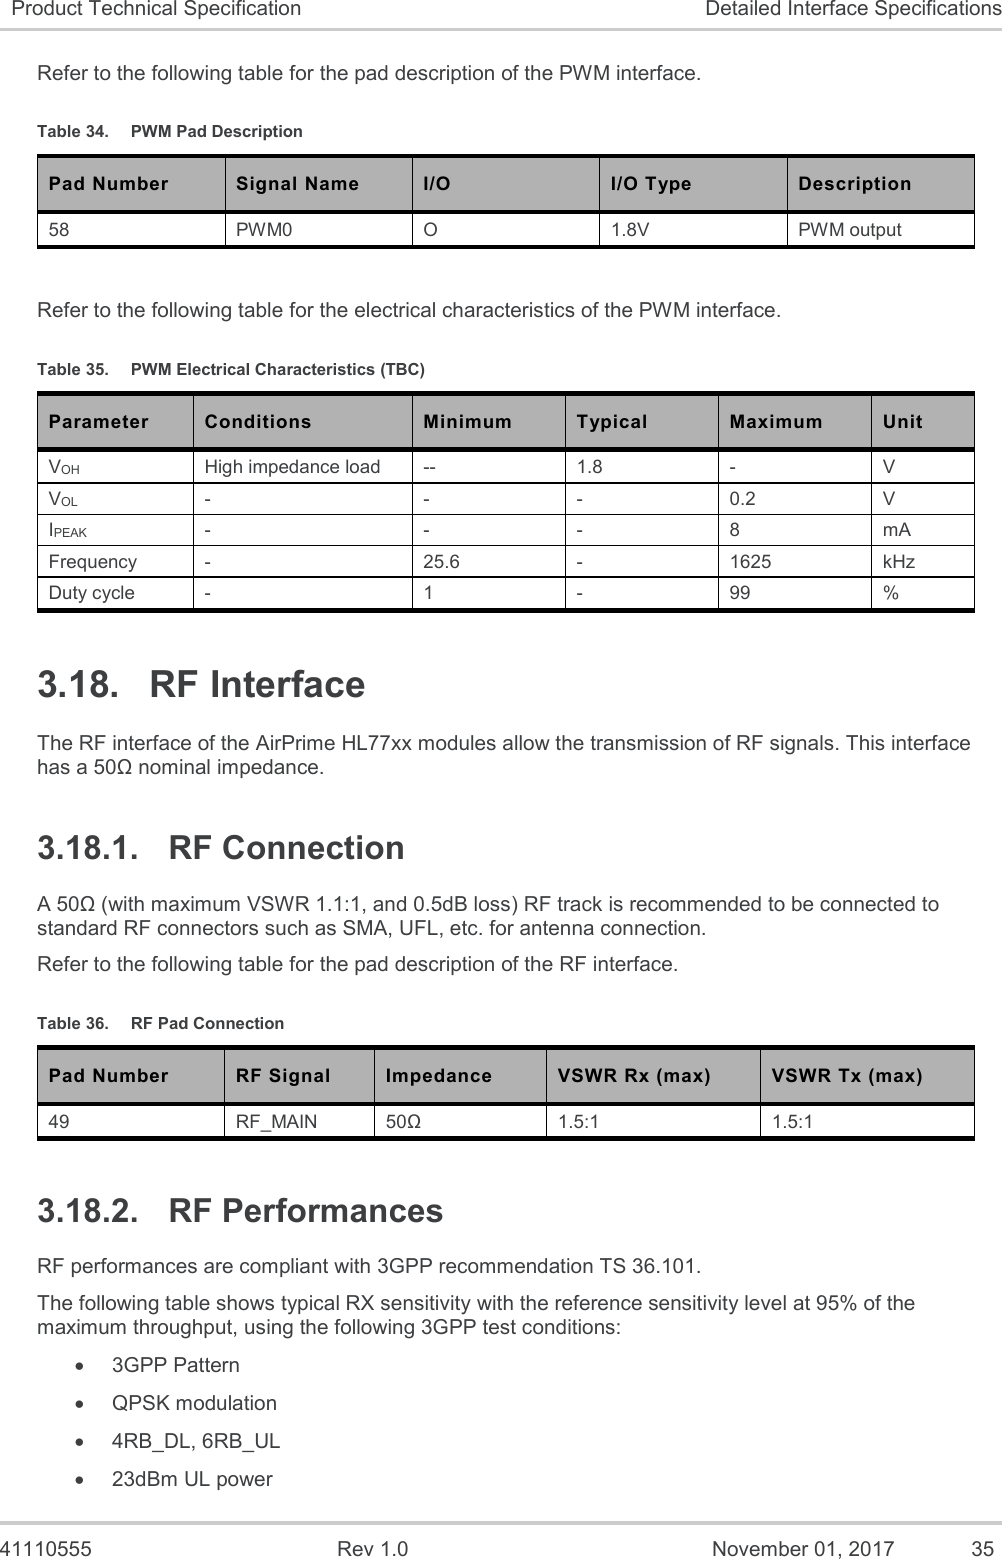   41110555  Rev 1.0  November 01, 2017  35 Product Technical Specification Detailed Interface Specifications Refer to the following table for the pad description of the PWM interface. Table 34.  PWM Pad Description Pad Number Signal Name I/O I/O Type Description 58 PWM0 O 1.8V PWM output  Refer to the following table for the electrical characteristics of the PWM interface. Table 35.  PWM Electrical Characteristics (TBC) Parameter Conditions Minimum Typical Maximum Unit VOH High impedance load -- 1.8 - V VOL - - - 0.2 V IPEAK - - - 8 mA Frequency - 25.6 - 1625 kHz Duty cycle - 1 - 99 % 3.18.  RF Interface The RF interface of the AirPrime HL77xx modules allow the transmission of RF signals. This interface has a 50Ω nominal impedance. 3.18.1.  RF Connection A 50Ω (with maximum VSWR 1.1:1, and 0.5dB loss) RF track is recommended to be connected to standard RF connectors such as SMA, UFL, etc. for antenna connection. Refer to the following table for the pad description of the RF interface. Table 36.  RF Pad Connection Pad Number RF Signal Impedance VSWR Rx (max) VSWR Tx (max) 49 RF_MAIN 50Ω 1.5:1 1.5:1 3.18.2.  RF Performances RF performances are compliant with 3GPP recommendation TS 36.101. The following table shows typical RX sensitivity with the reference sensitivity level at 95% of the maximum throughput, using the following 3GPP test conditions: • 3GPP Pattern • QPSK modulation • 4RB_DL, 6RB_UL • 23dBm UL power 